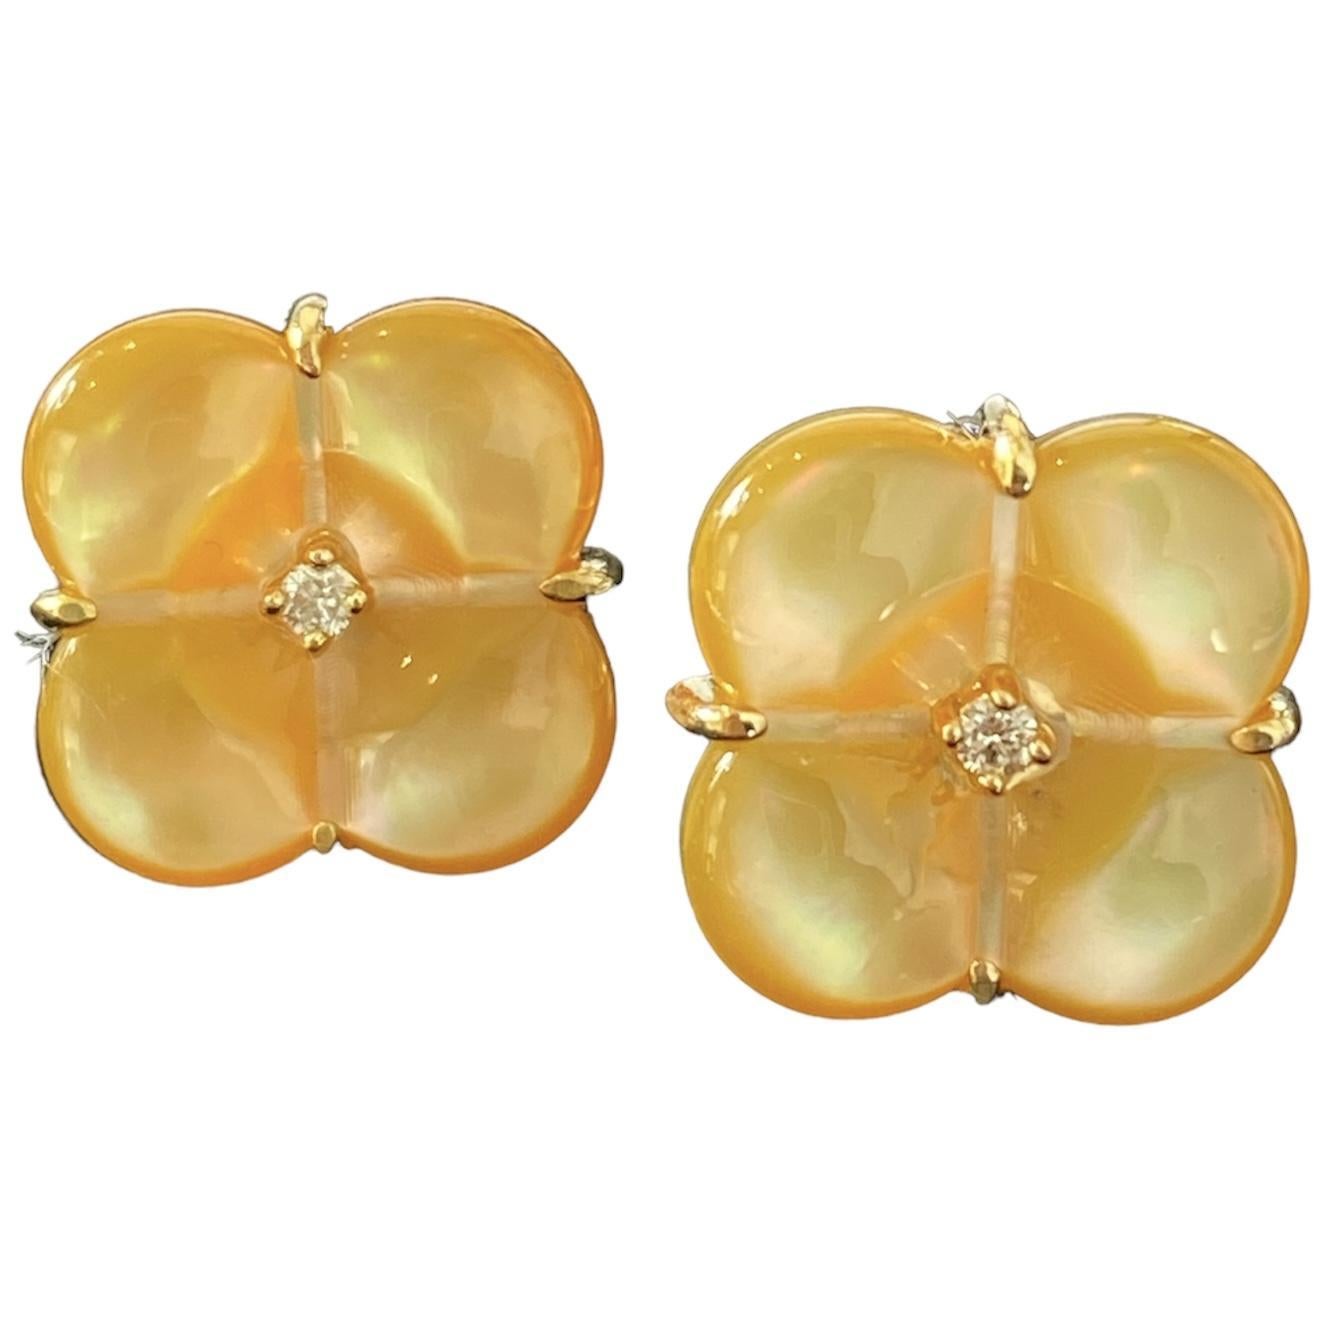 The 18K yellow gold golden mother of pearl clover diamond earring is a captivating and elegant accessory that effortlessly combines classic design with a modern flair.
Crafted from solid 18-karat yellow gold, the earring features a delicate clover